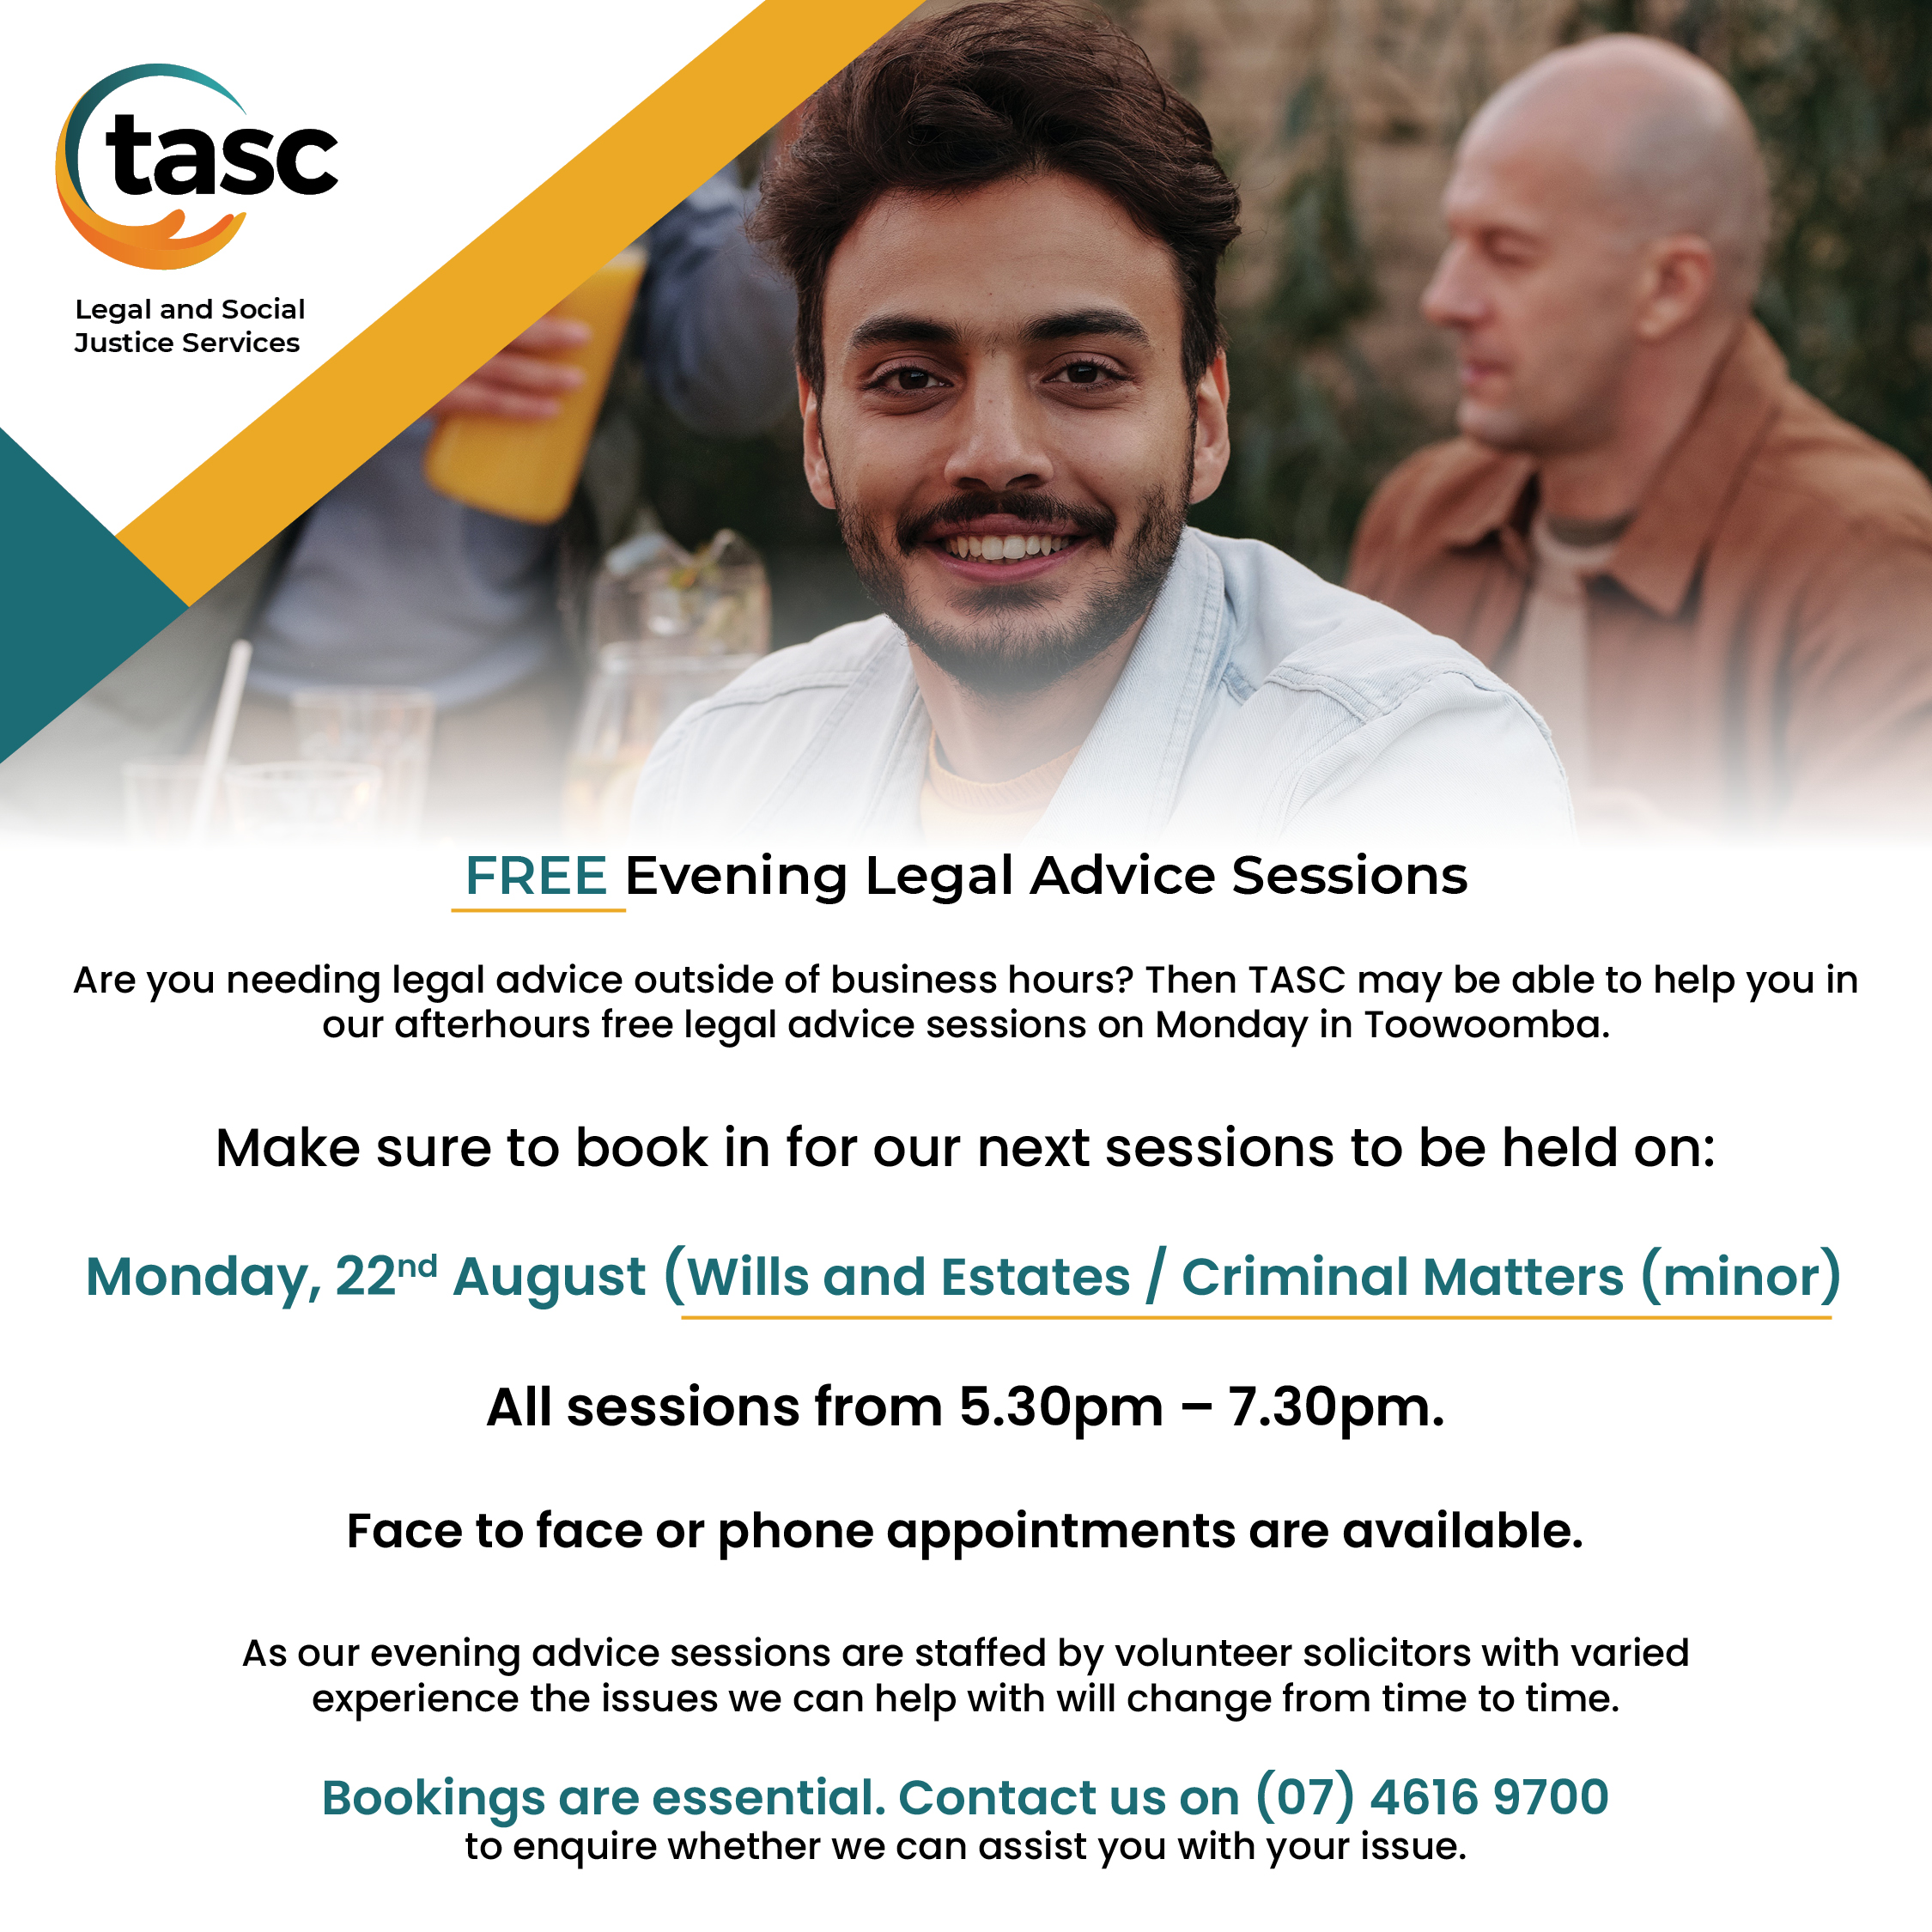 Free Evening Legal Advice Sessions – Wills and Estates / Criminal Matters (Minor) Monday, 22 August 2022